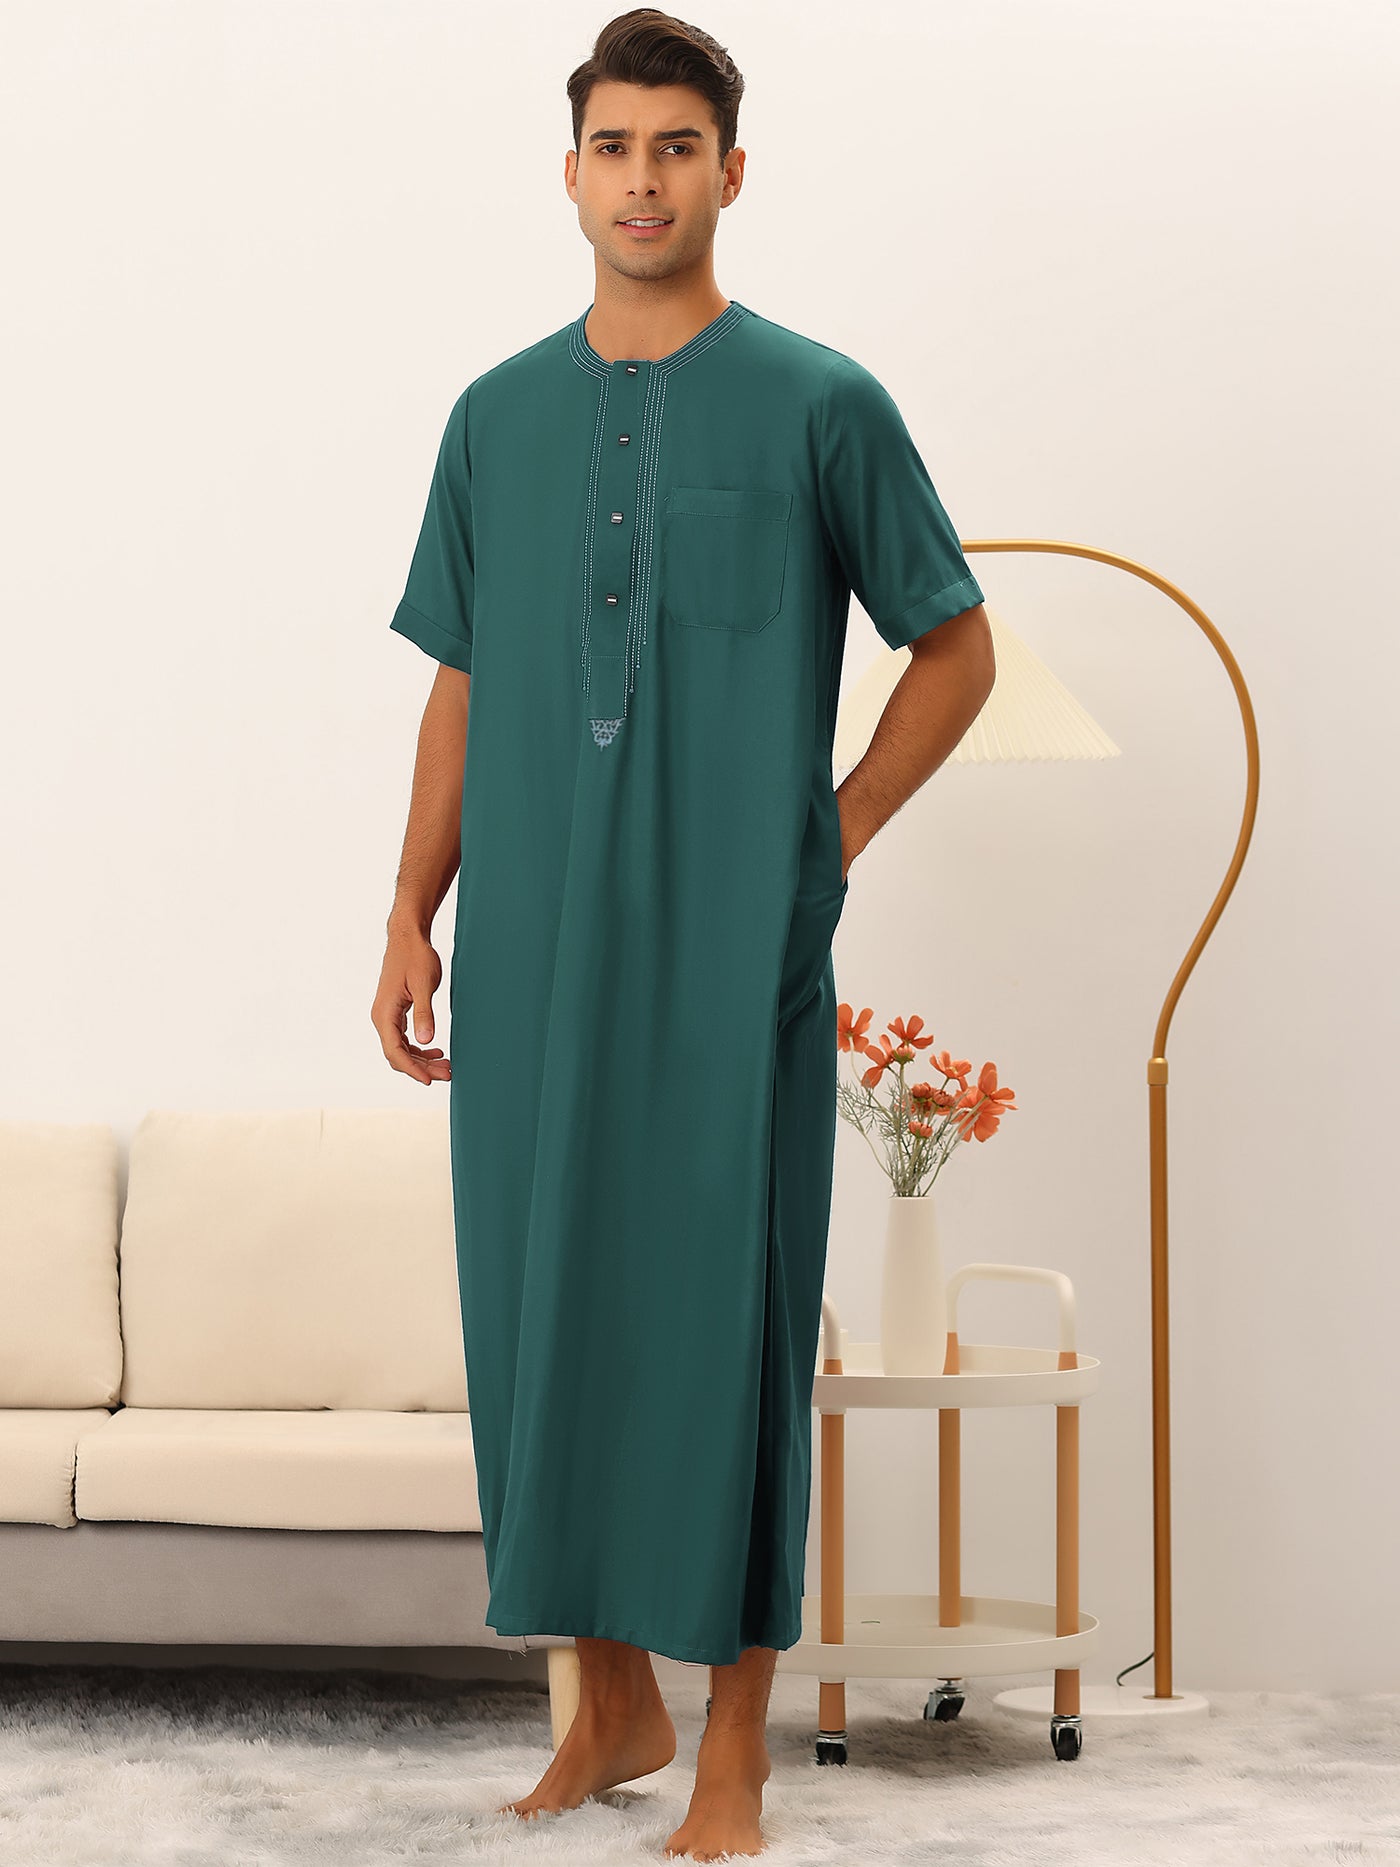 Bublédon Loose Fit Night Gown for Men's Solid Color Short Sleeves Button Pajamas Sleepshirt